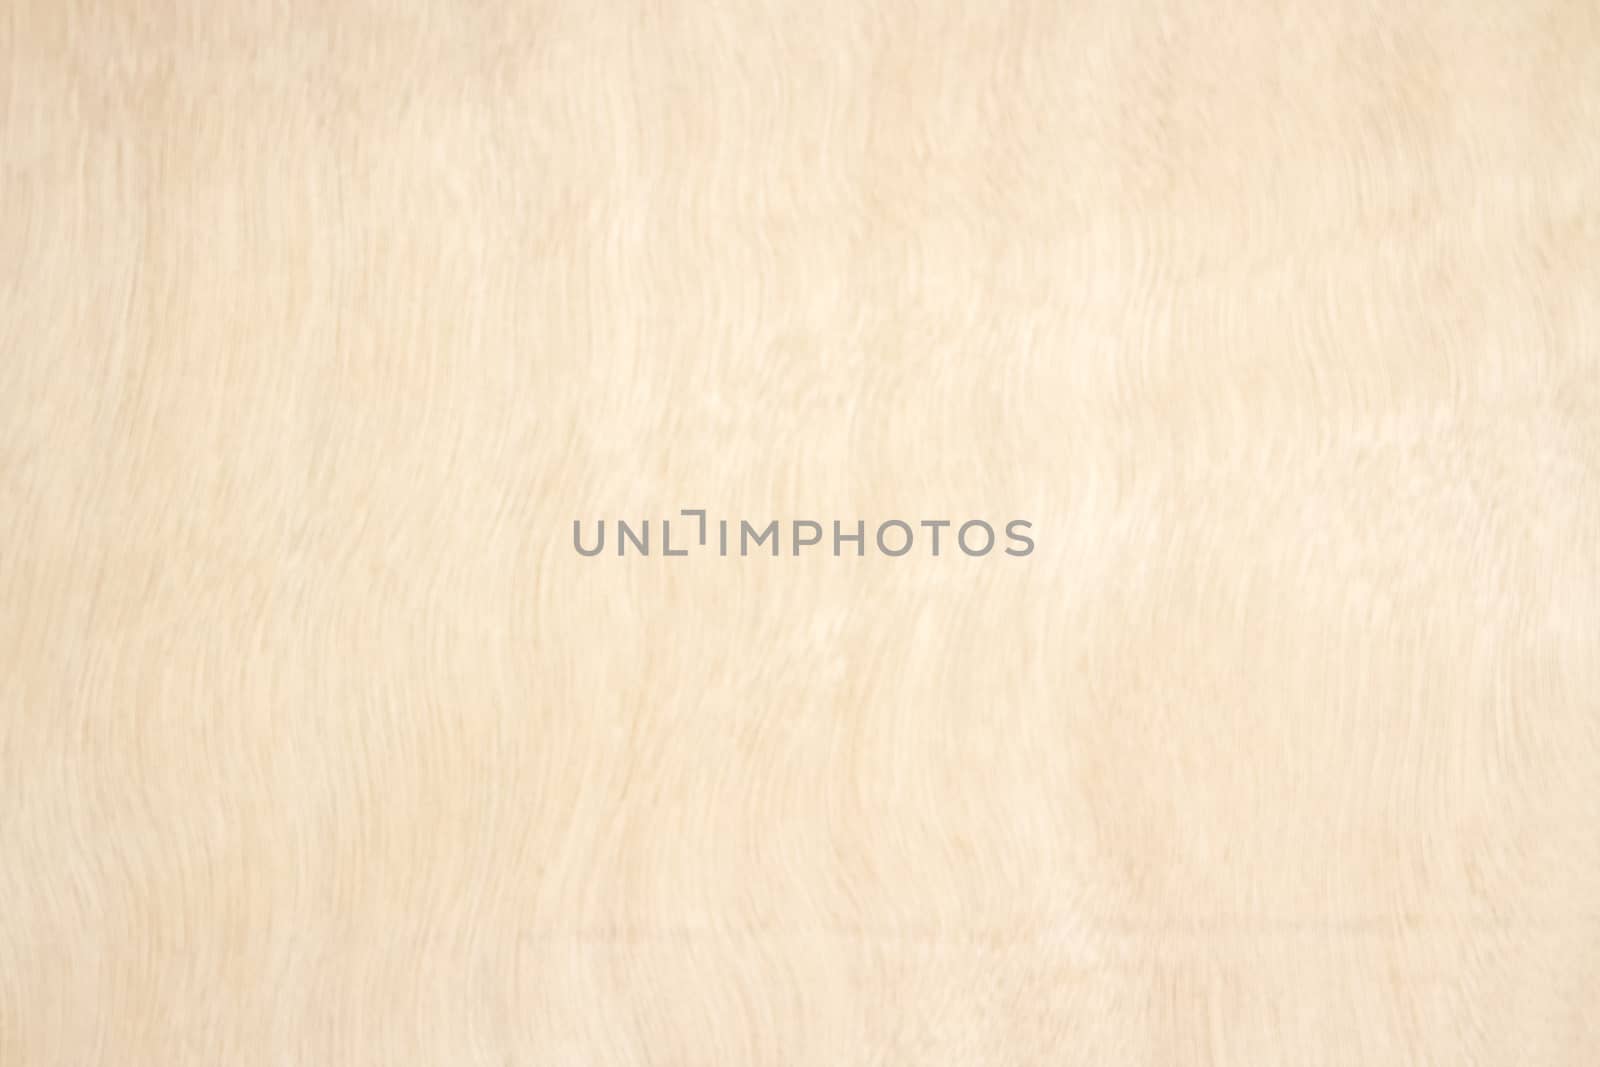 Wood texture background close up for your art by TakerWalker